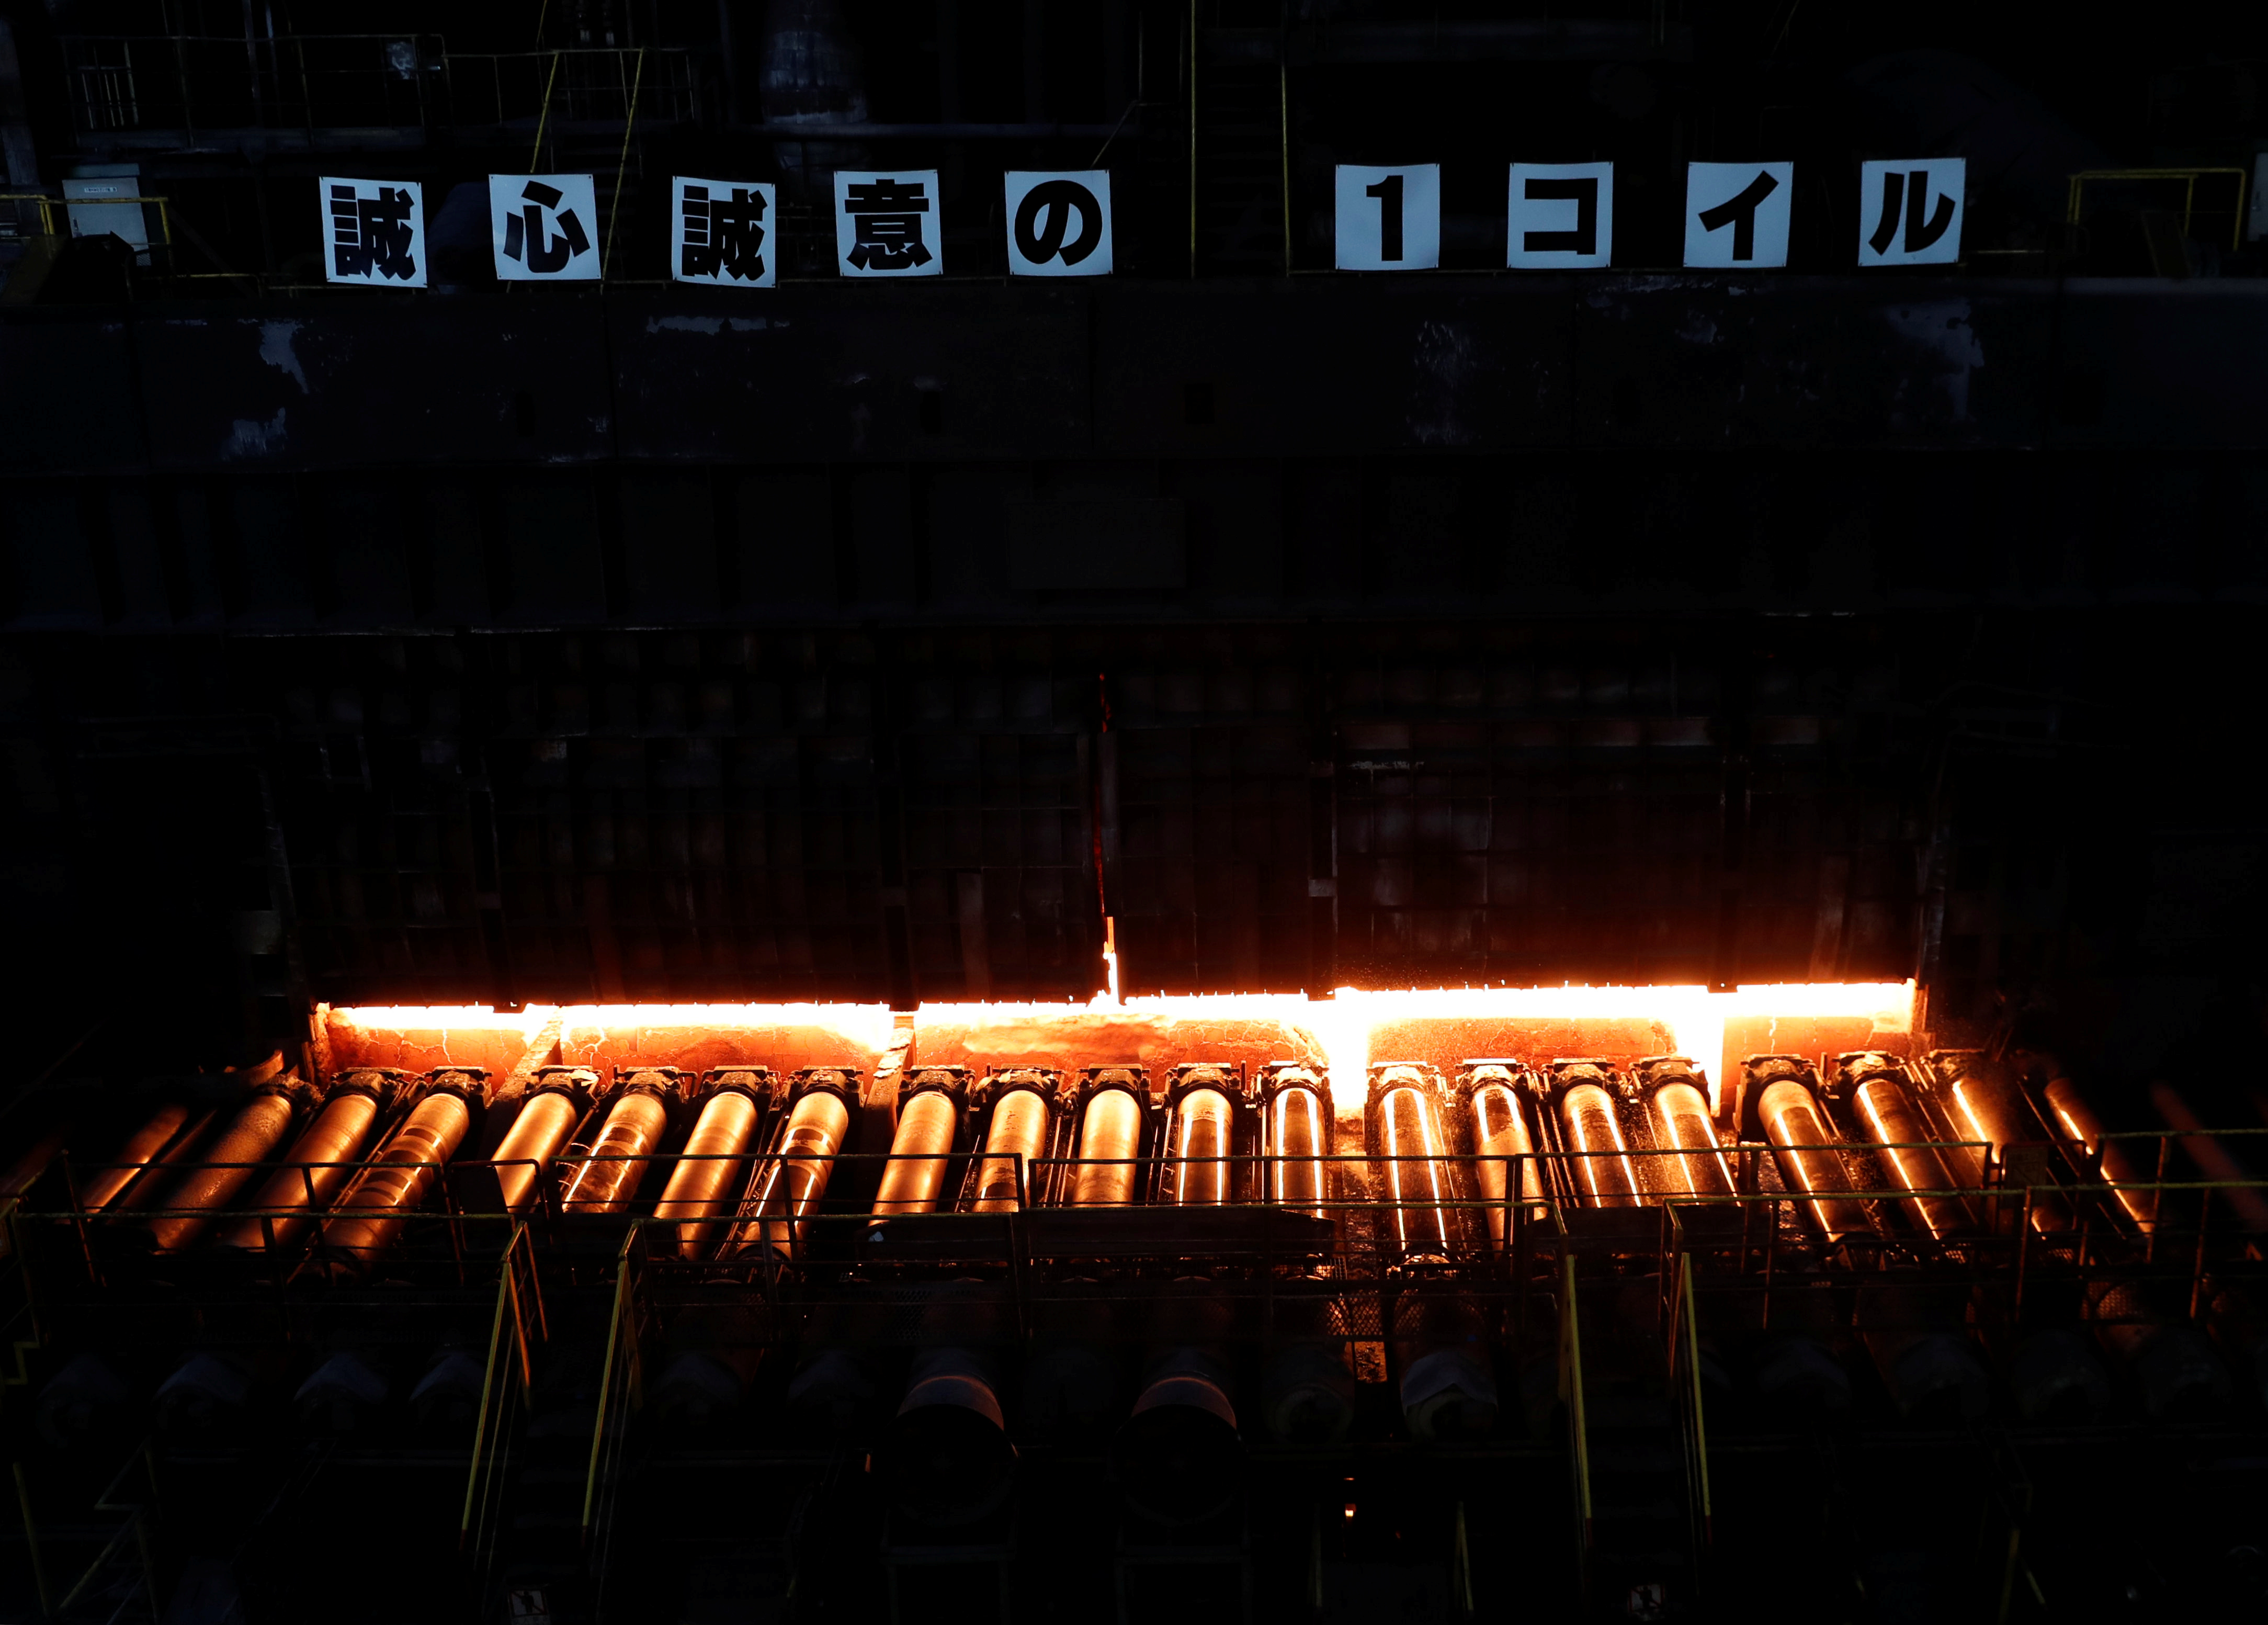 A production line of Nippon Steel & Sumitomo Metal Corp.'s Kimitsu steel plant is pictured in Kimitsu, Chiba Prefecture, Japan, May 31,  2018. REUTERS/Kim Kyung-Hoon